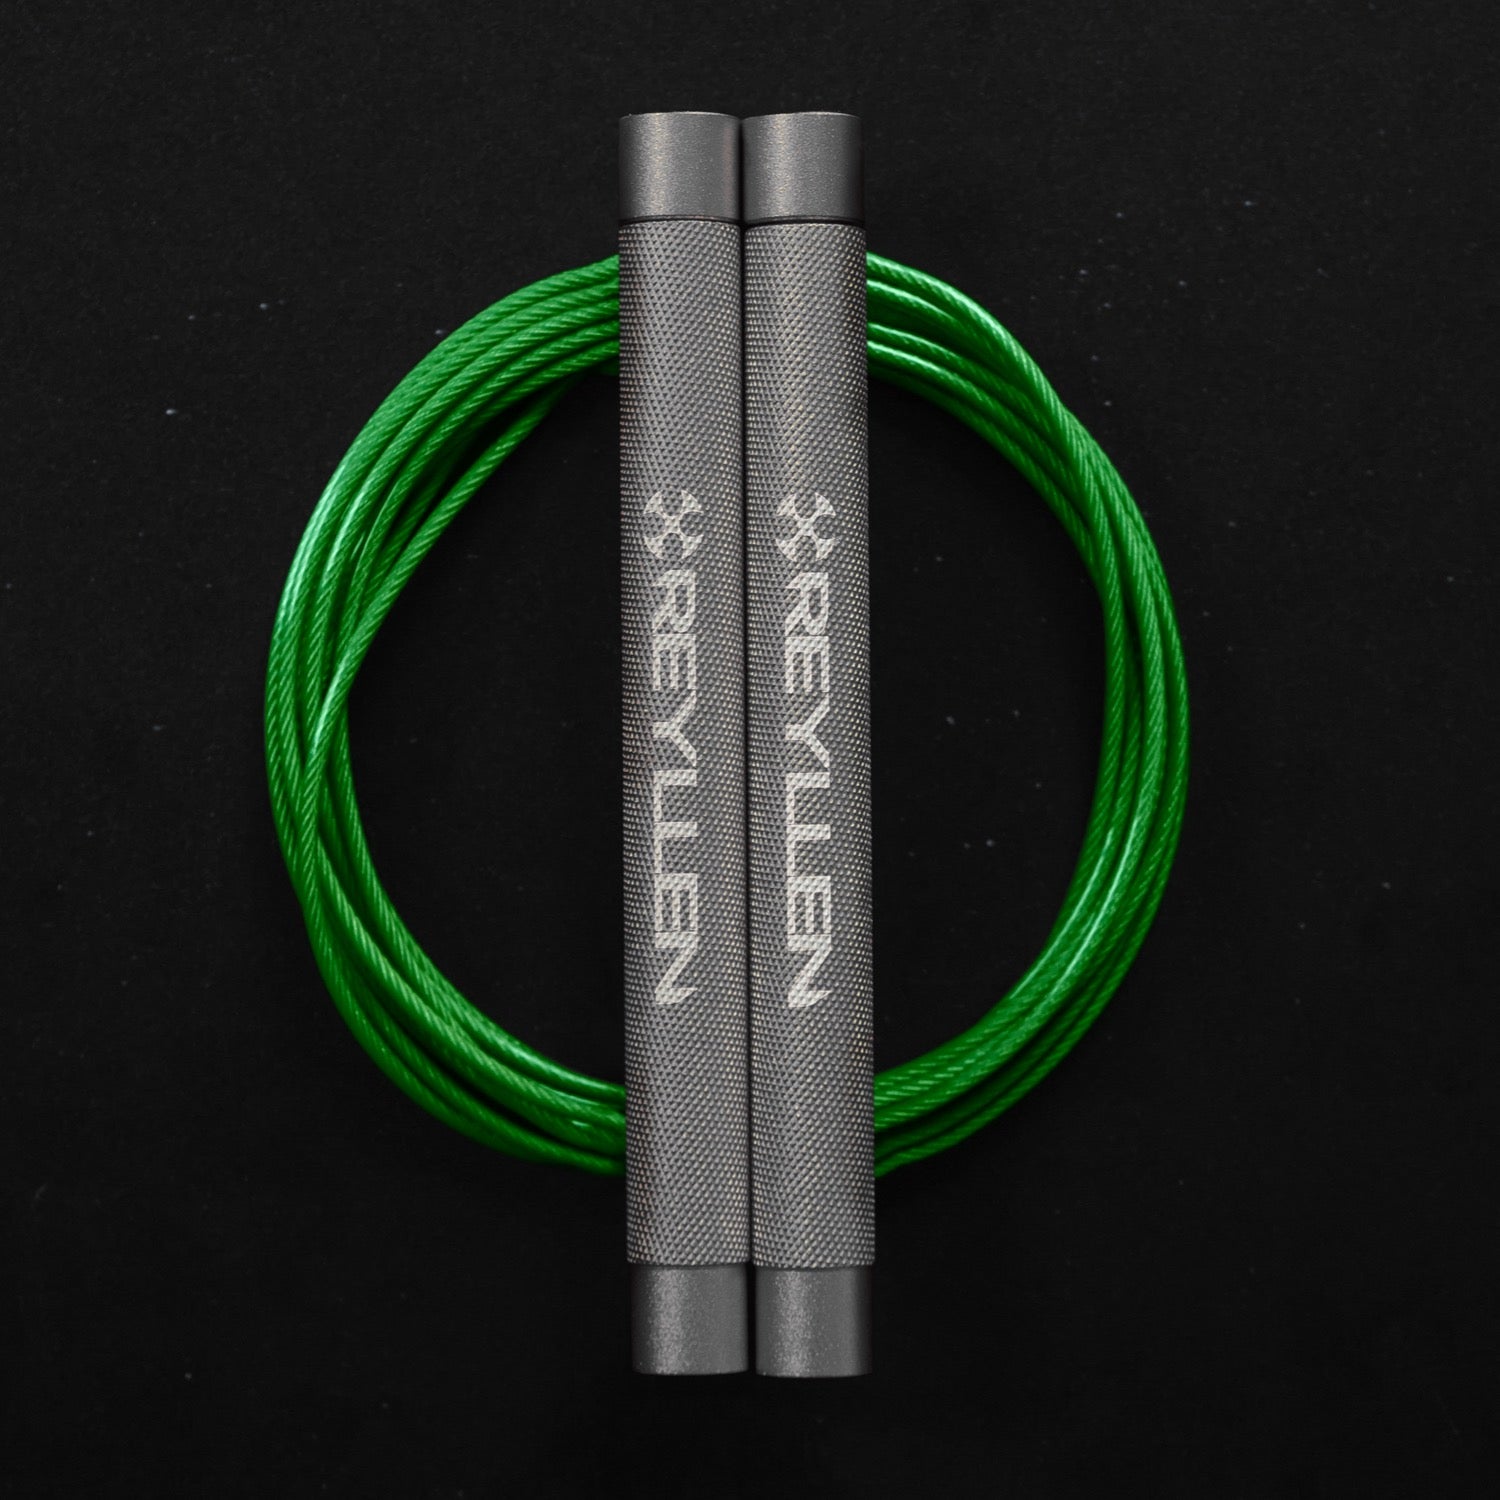 Reyllen Flare Mx Speed Skipping Jump Rope - Aluminium Handles - silver with green pvc cable